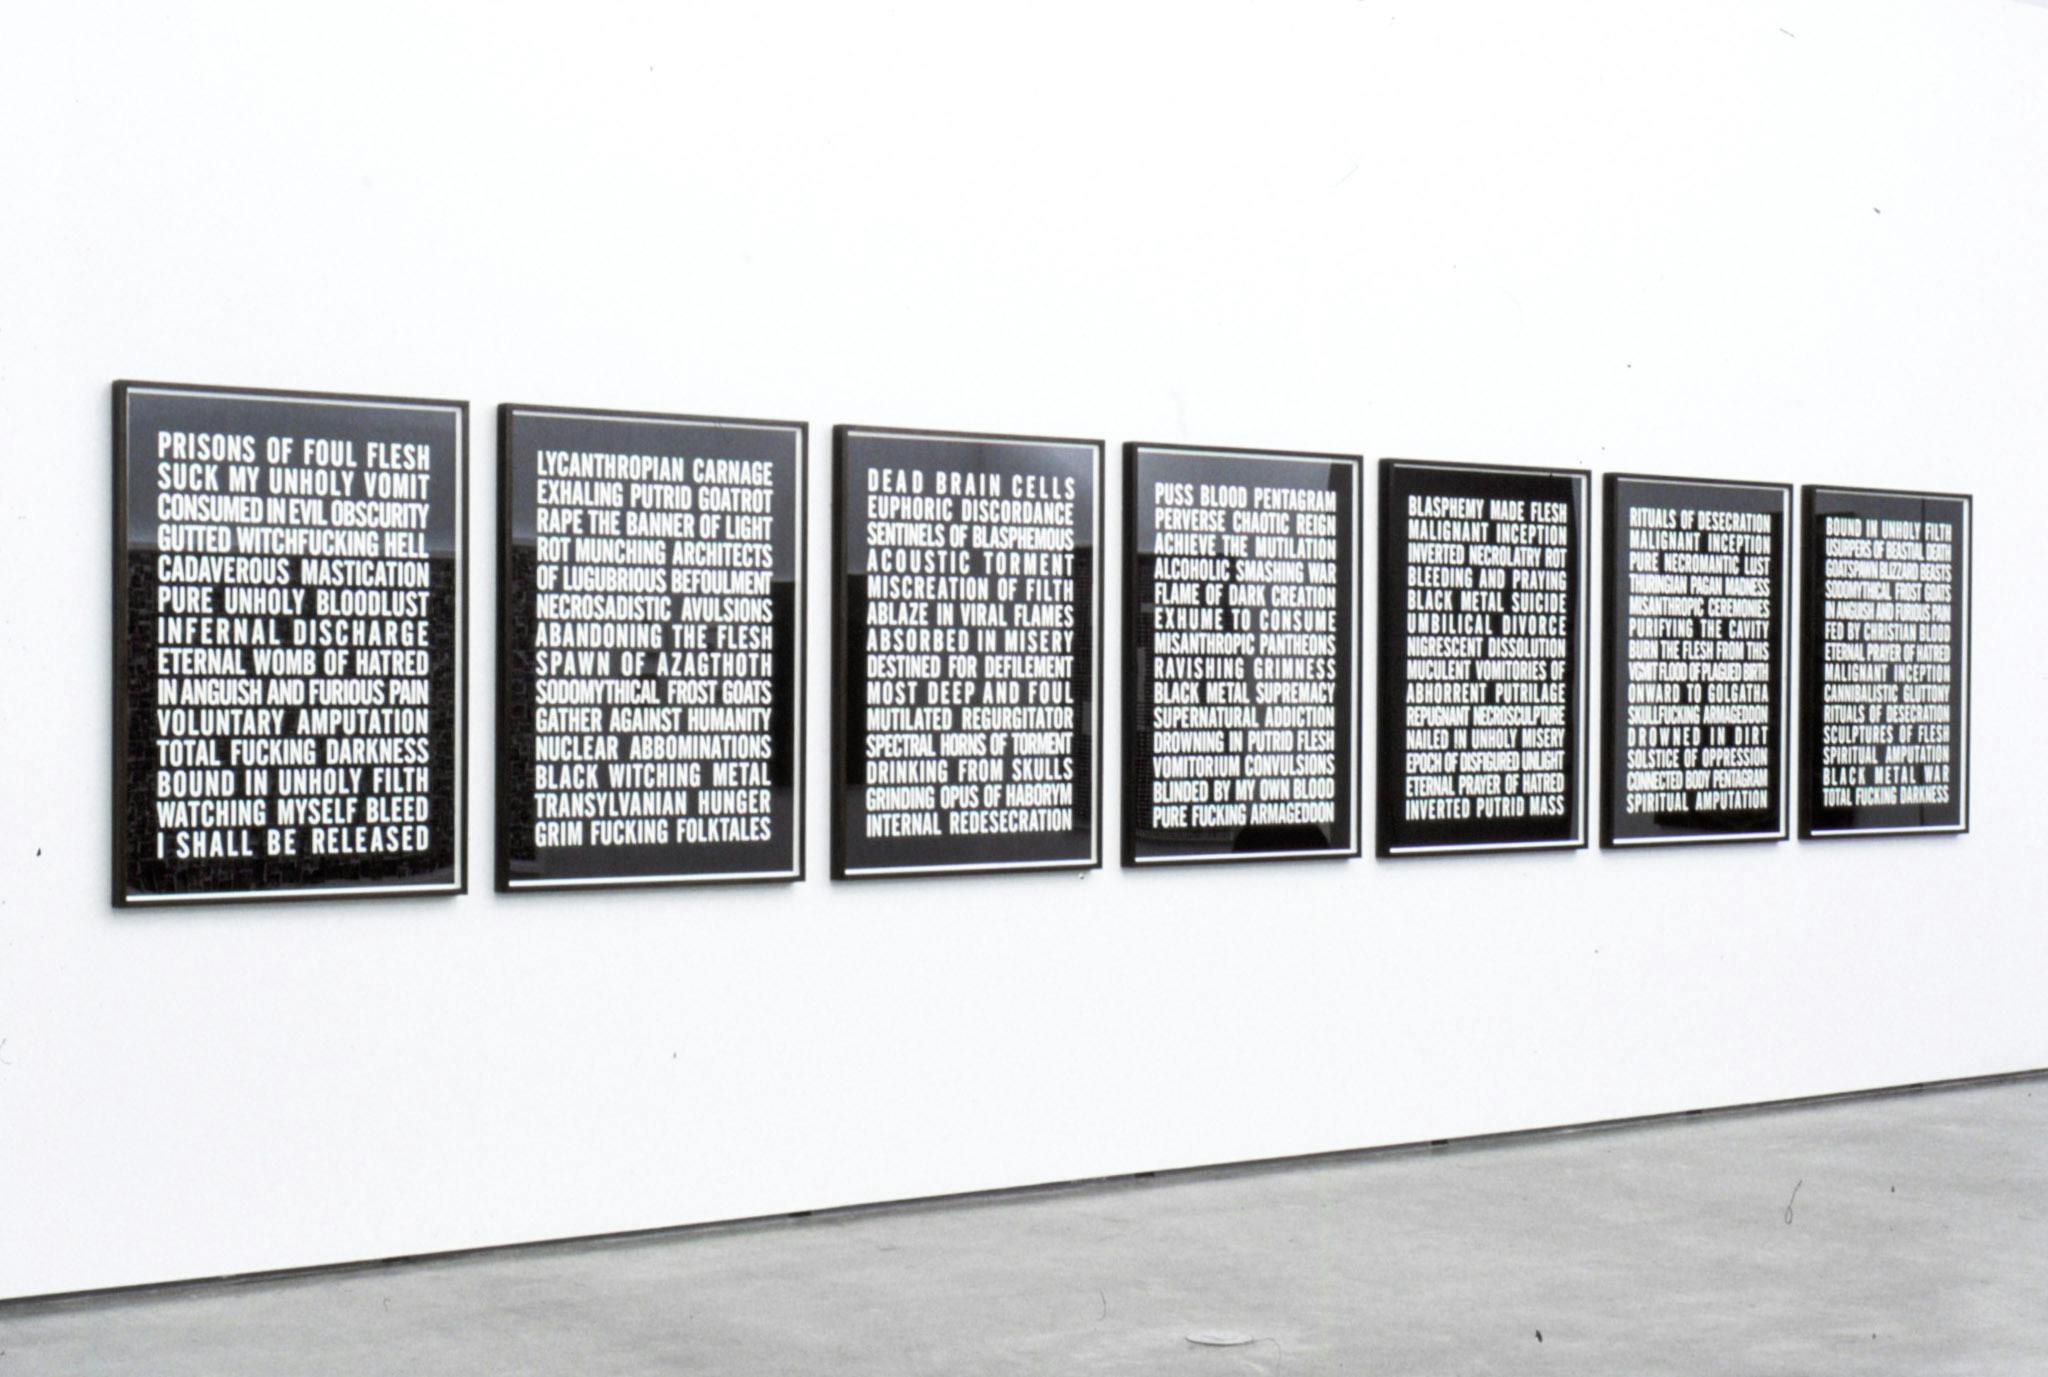 Installation image of works by Steven Shearer. Seven text-based works, on which English words appear in all capital letters in white on black background, are mounted on the wall.